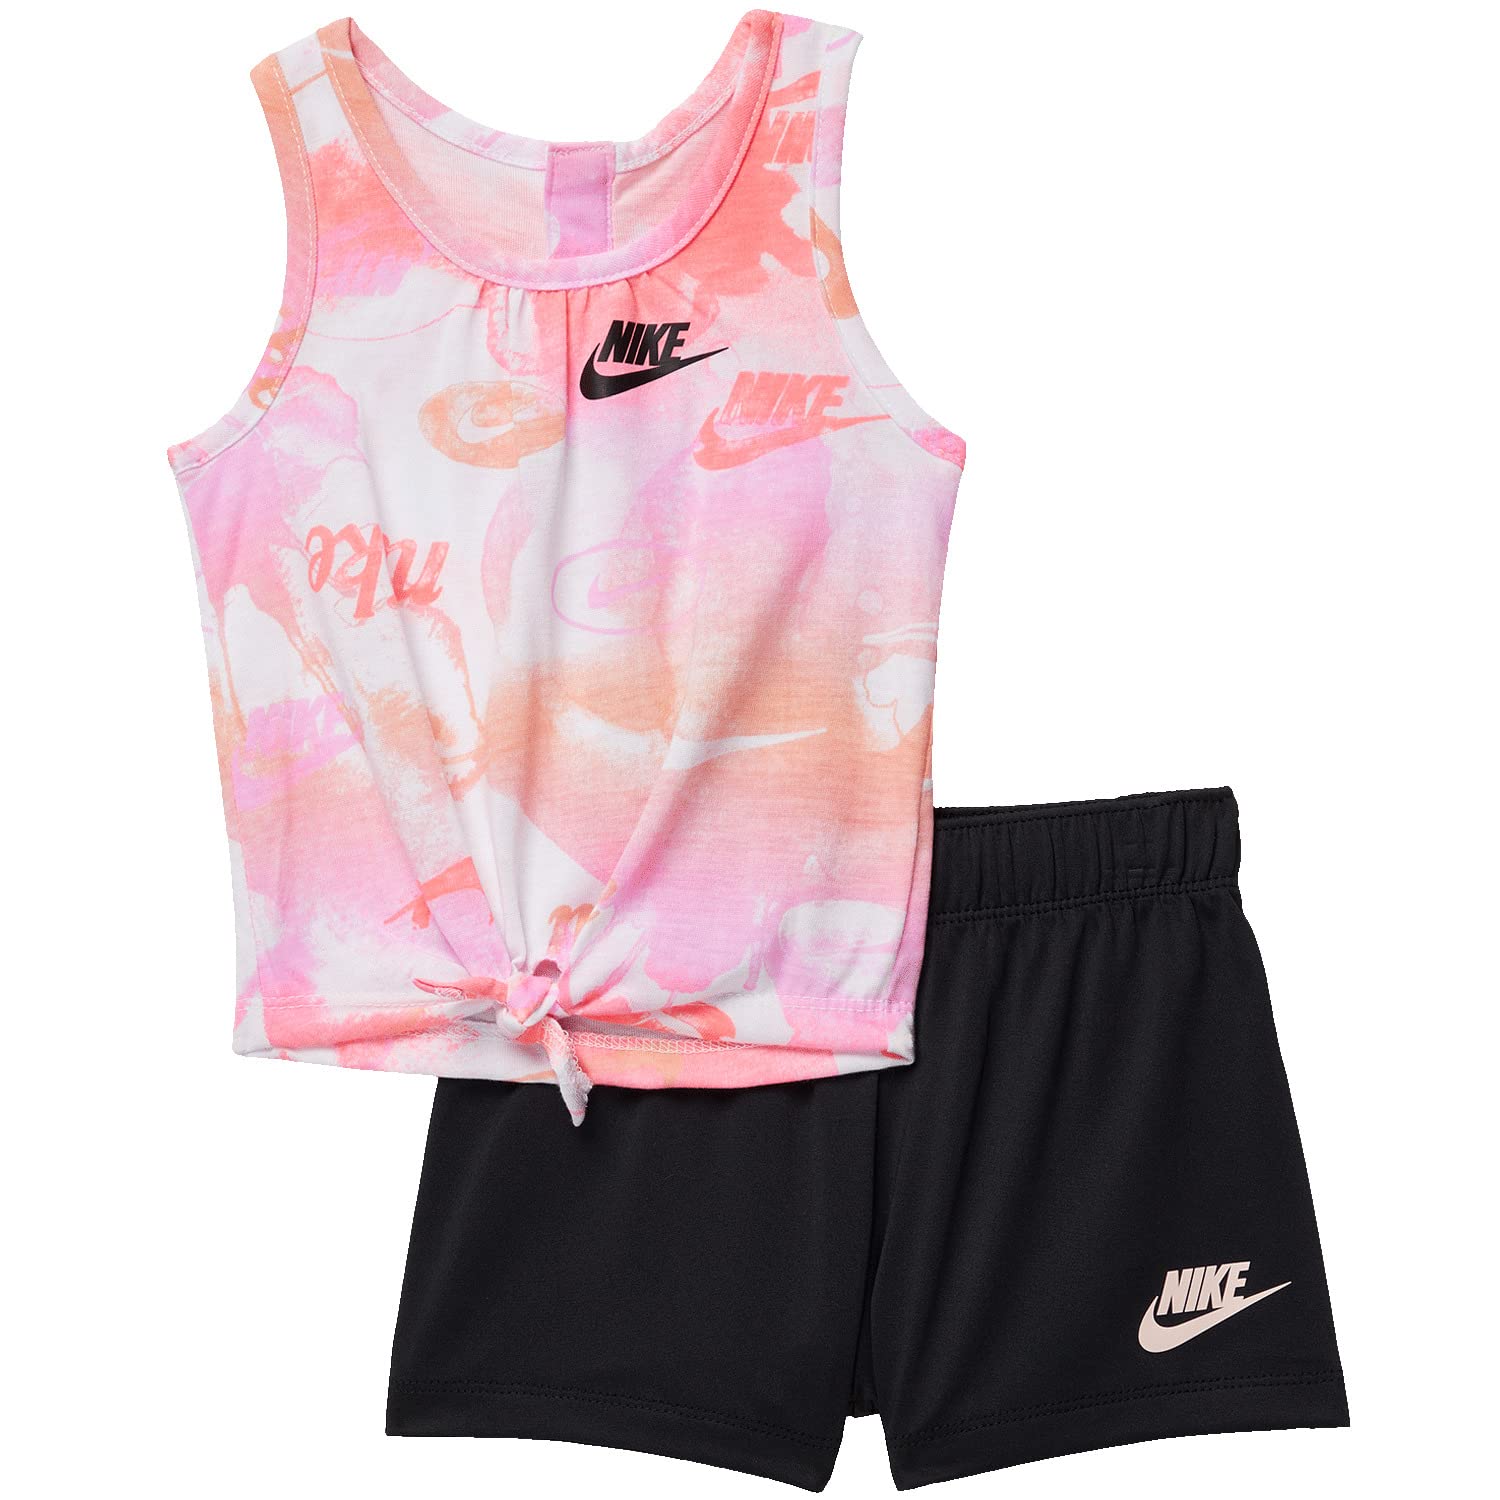 Image 1 of Printed Knotted Tank Top and Jersey Shorts Set (Infant)